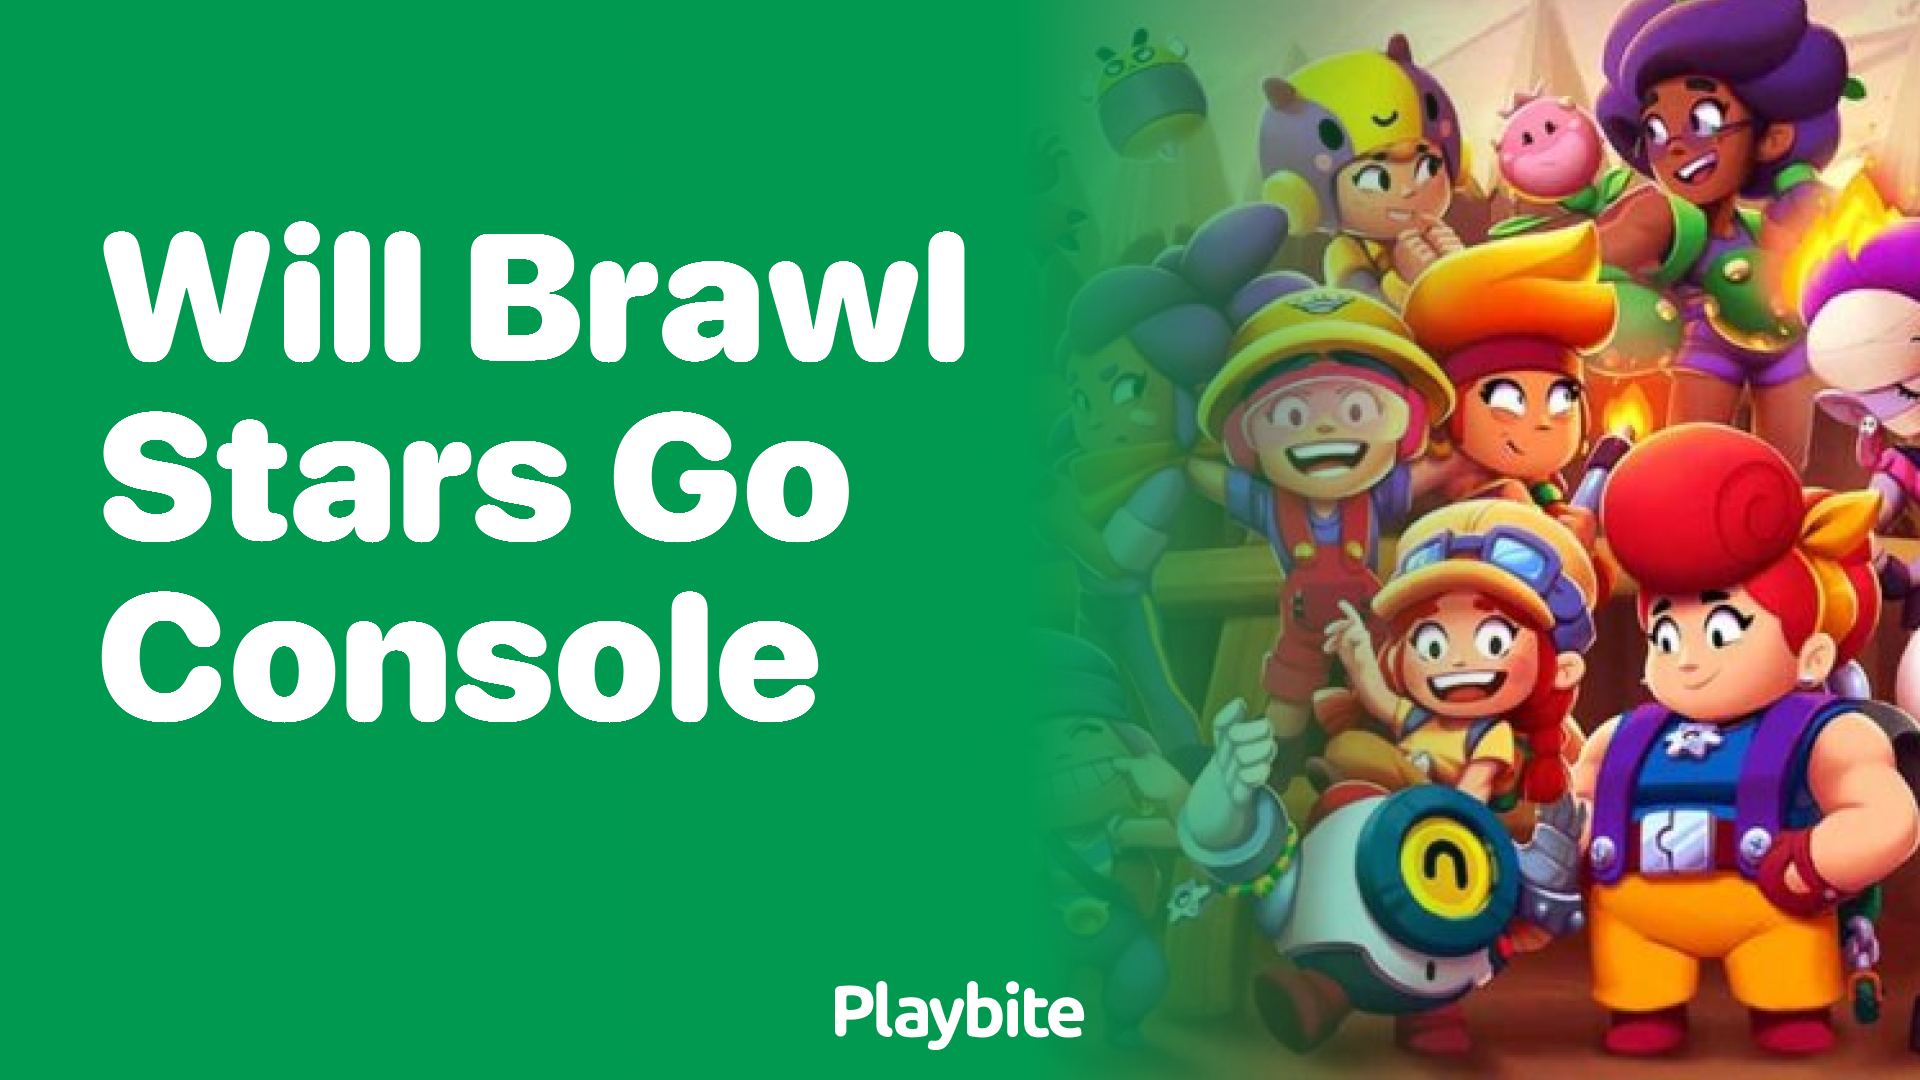 Will Brawl Stars Make the Leap to Console Gaming?